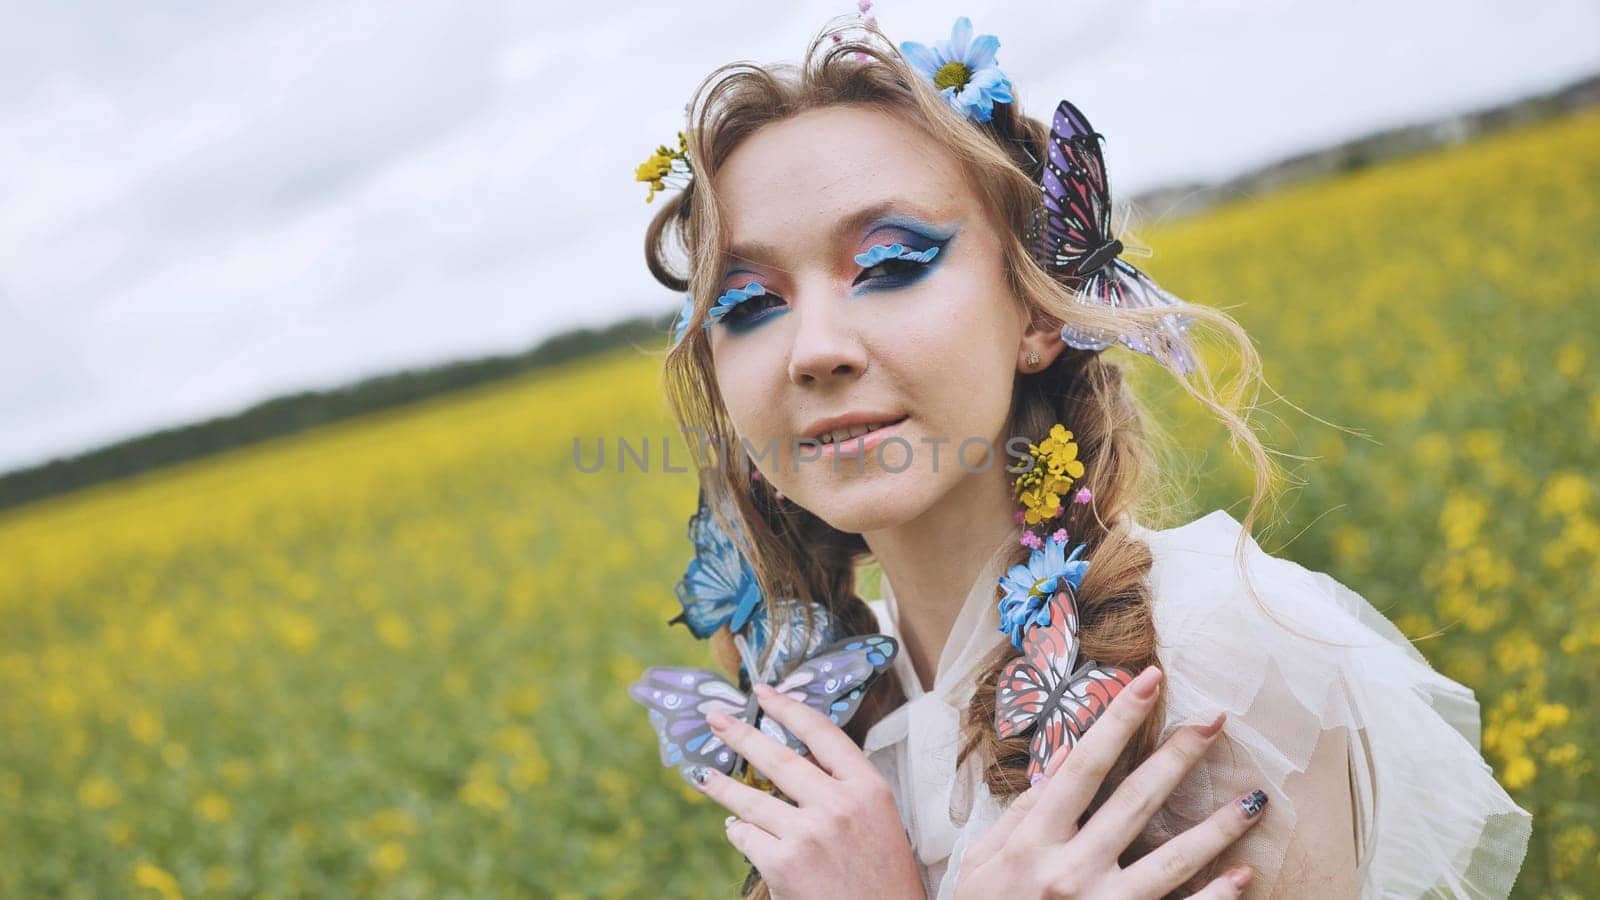 A young girl poses in a rapeseed field with a beautiful hairdo of flowers and butterflies